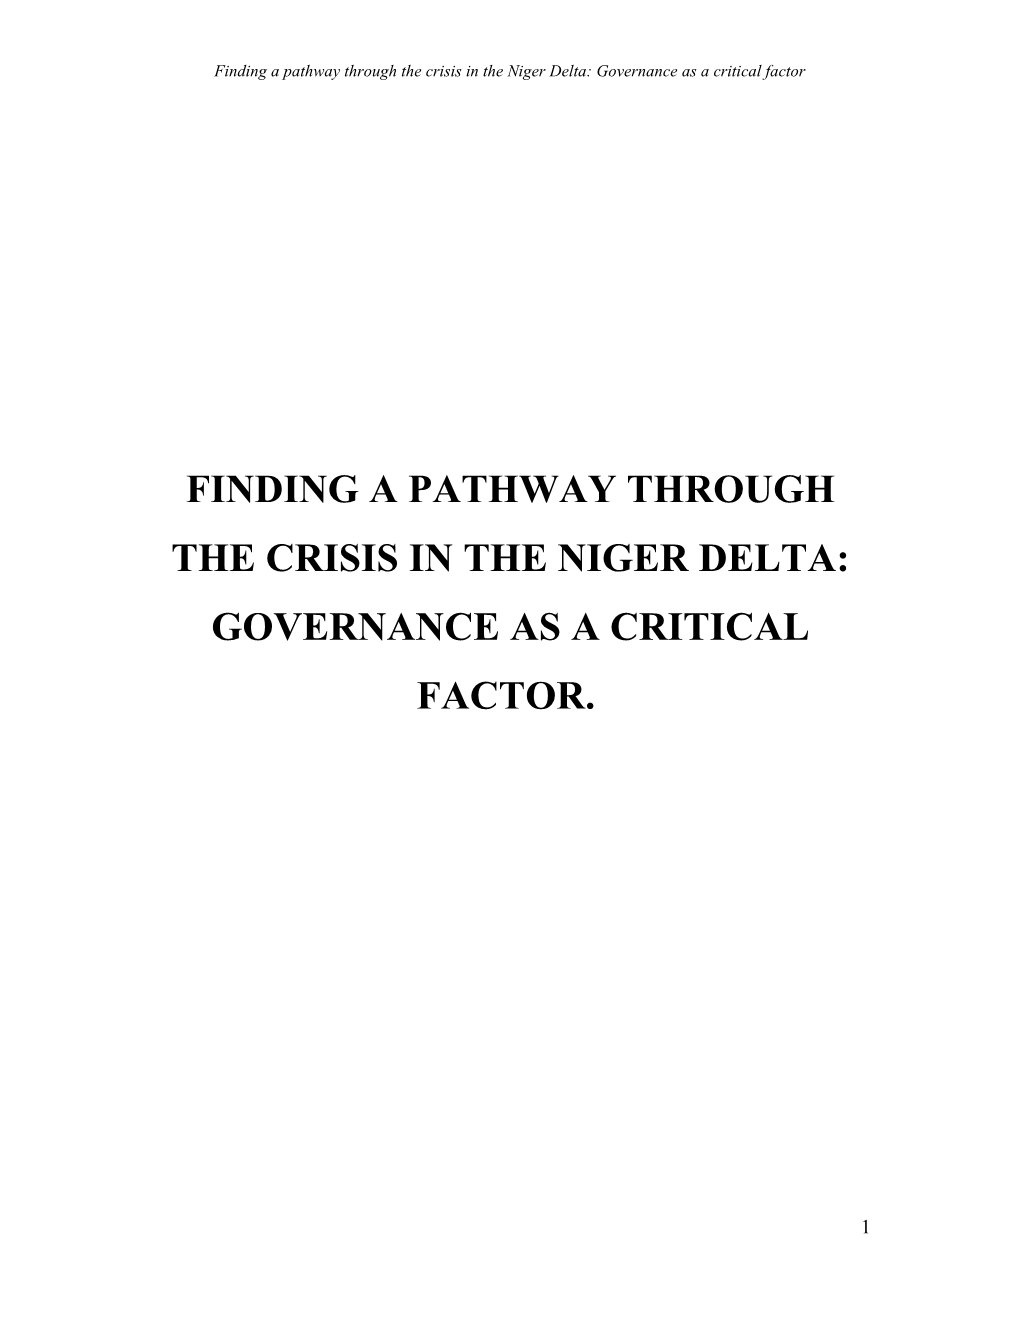 Finding a Pathway Through the Crisis in the Niger Delta: Governance As a Critical Factor